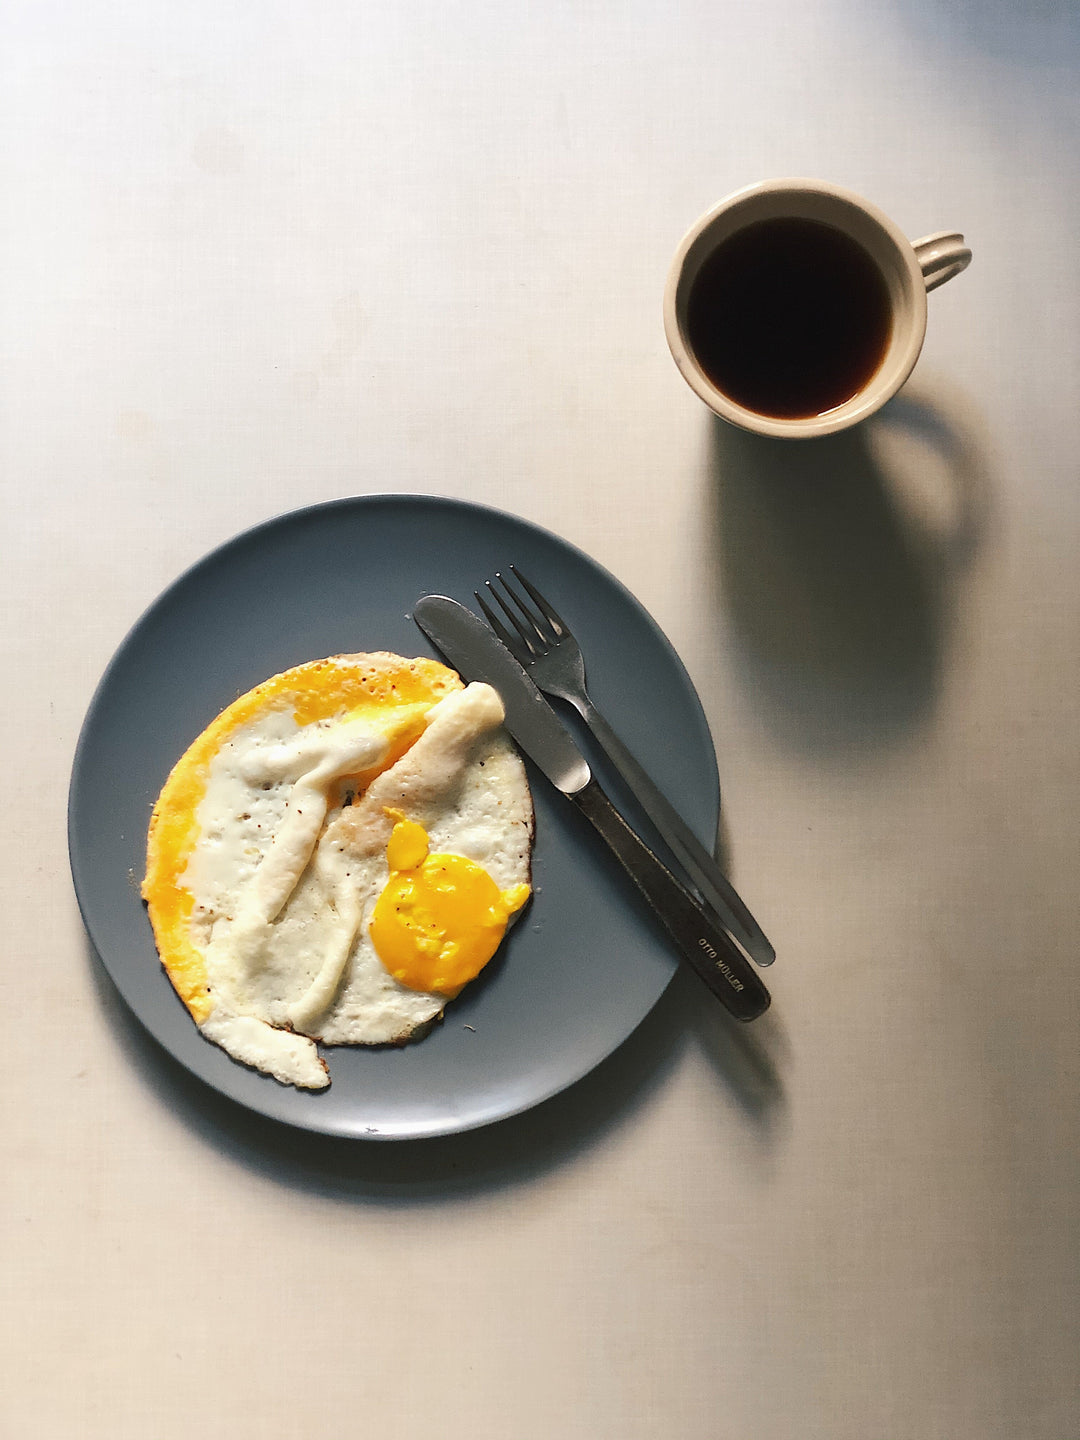 Busy Morning? Healthy Breakfast Ideas Packed with High Protein